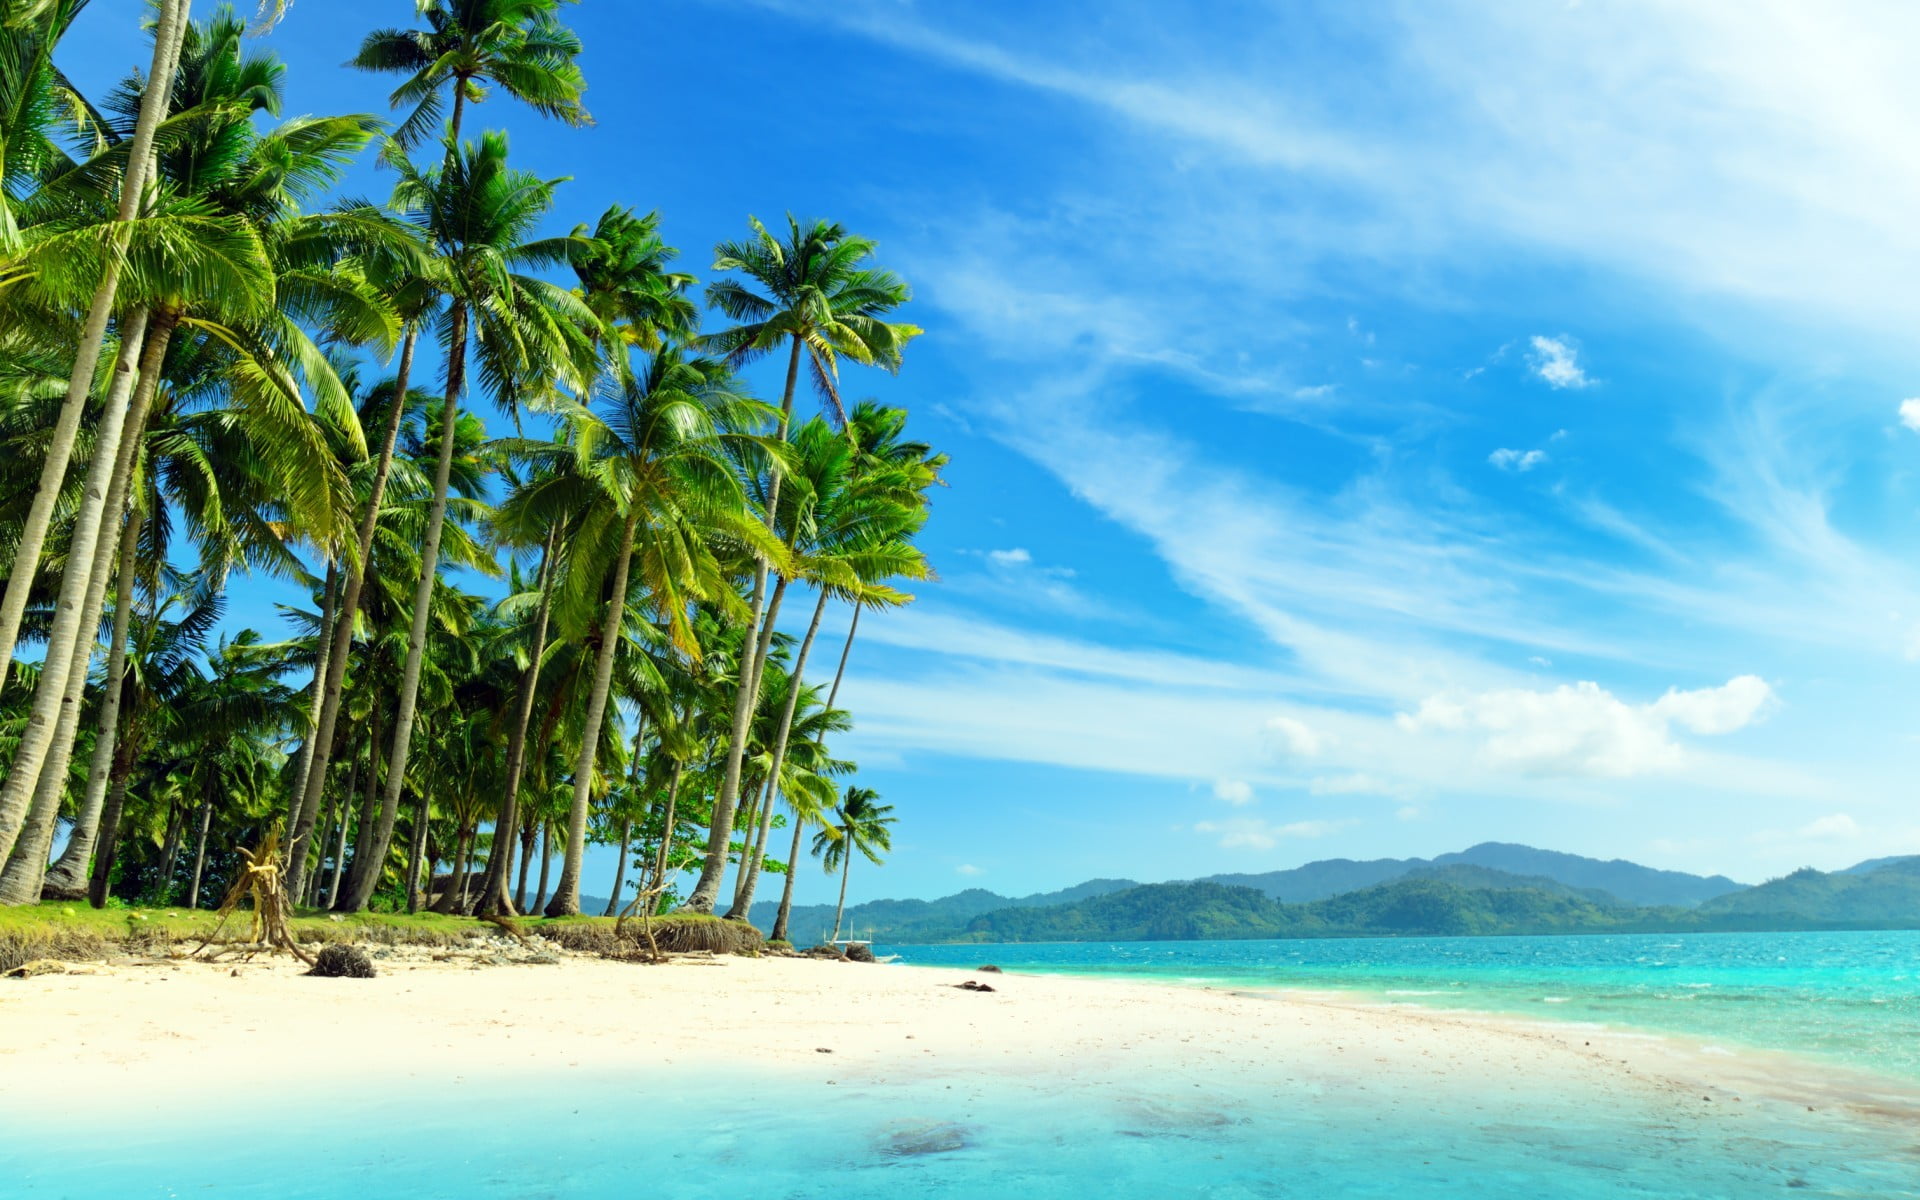 green palm trees, beach, tropical, sky, tropical climate, beauty in nature